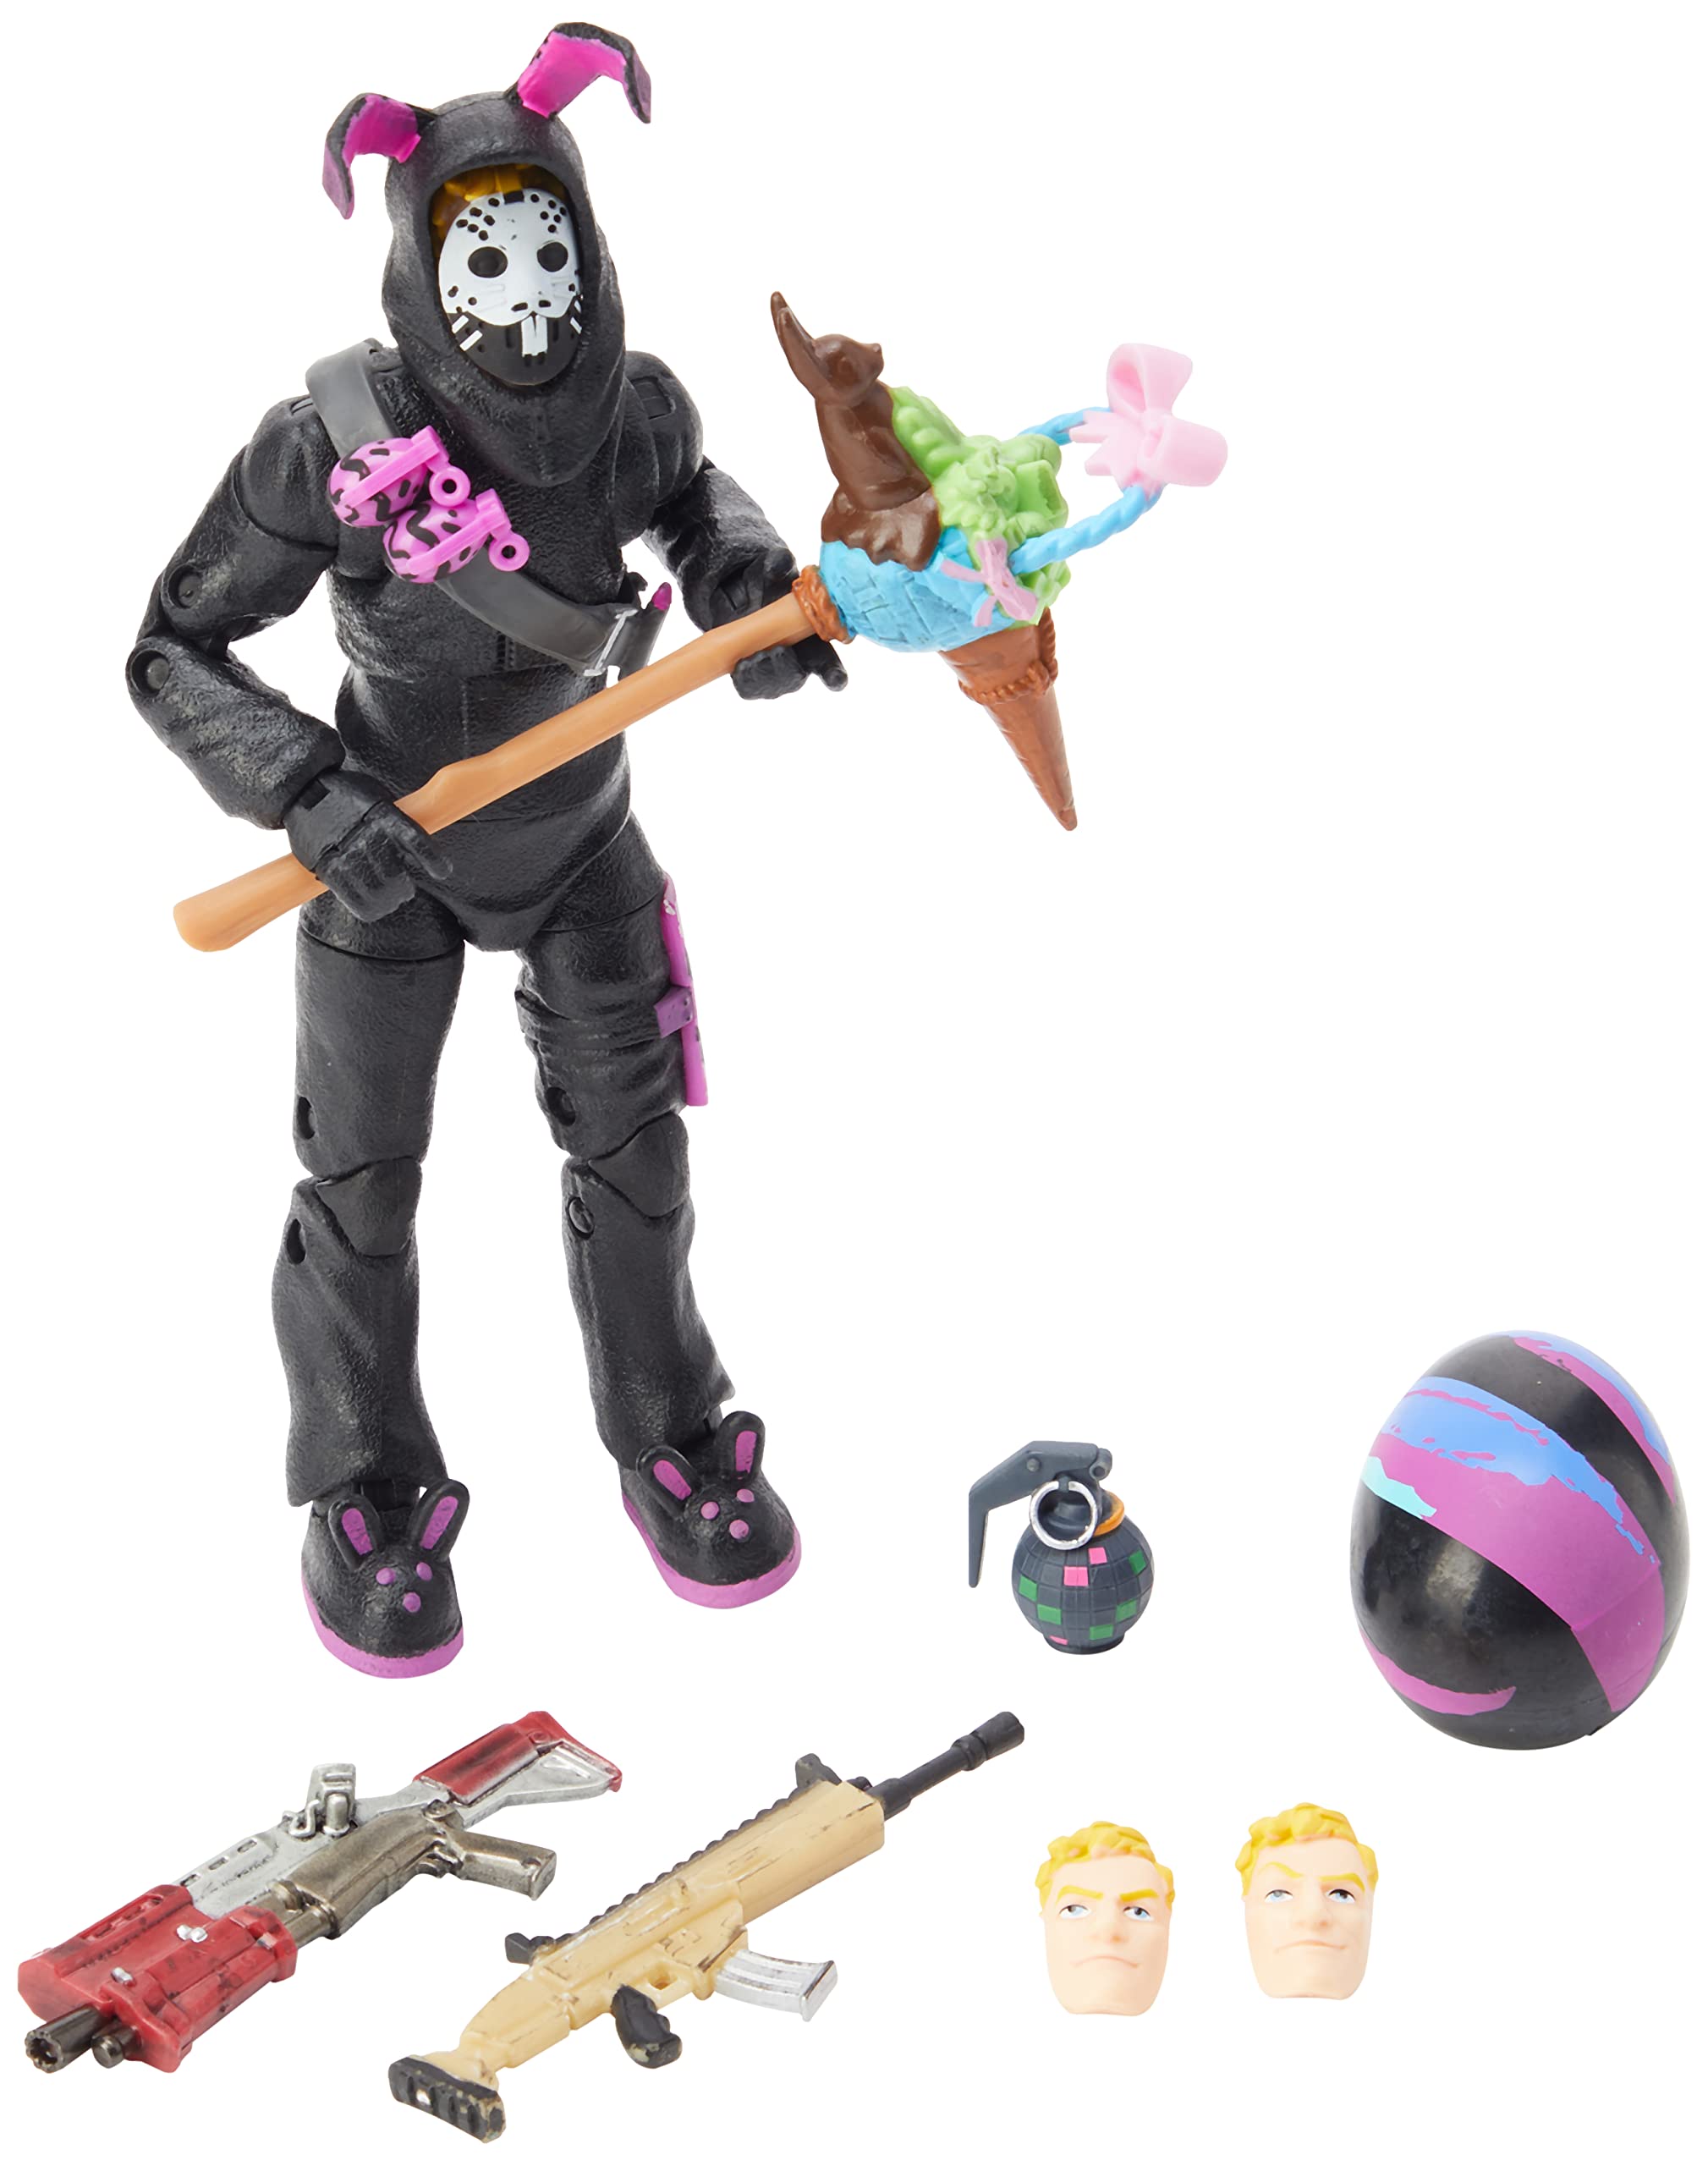 Fortnite Legendary Series Rabbit Raider (Dark), 6-inch Highly Detailed Figure with Harvesting Tool, Weapons, Back Bling, and Interchangeable Faces Multicolor FNT0857